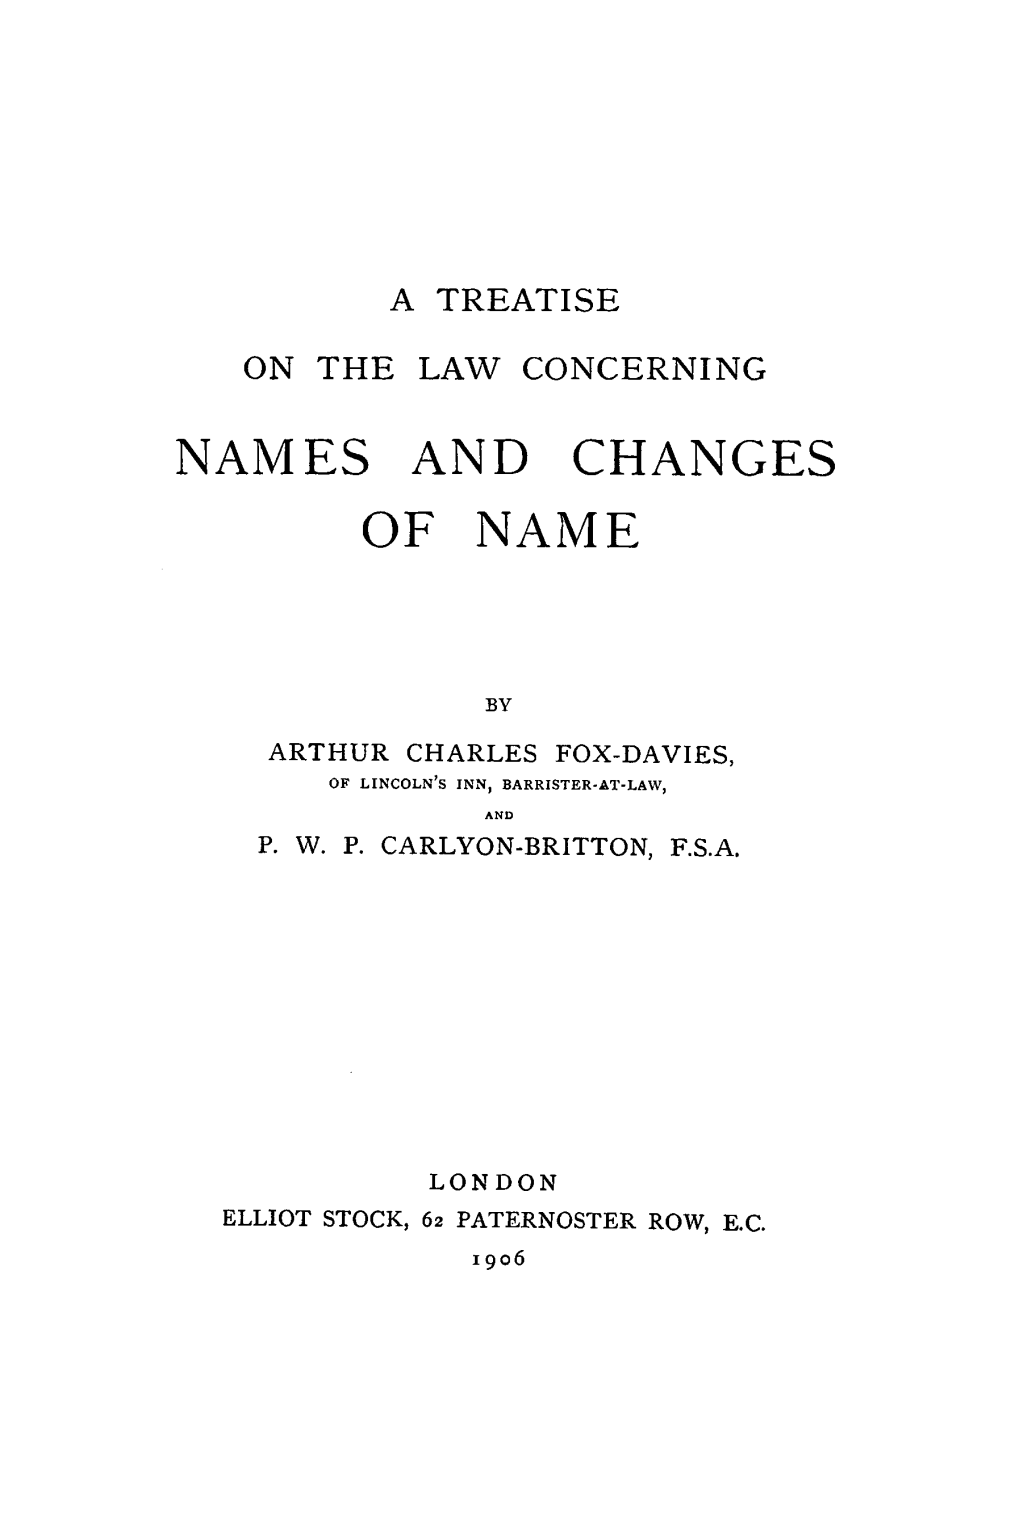 Names and Changes of Name